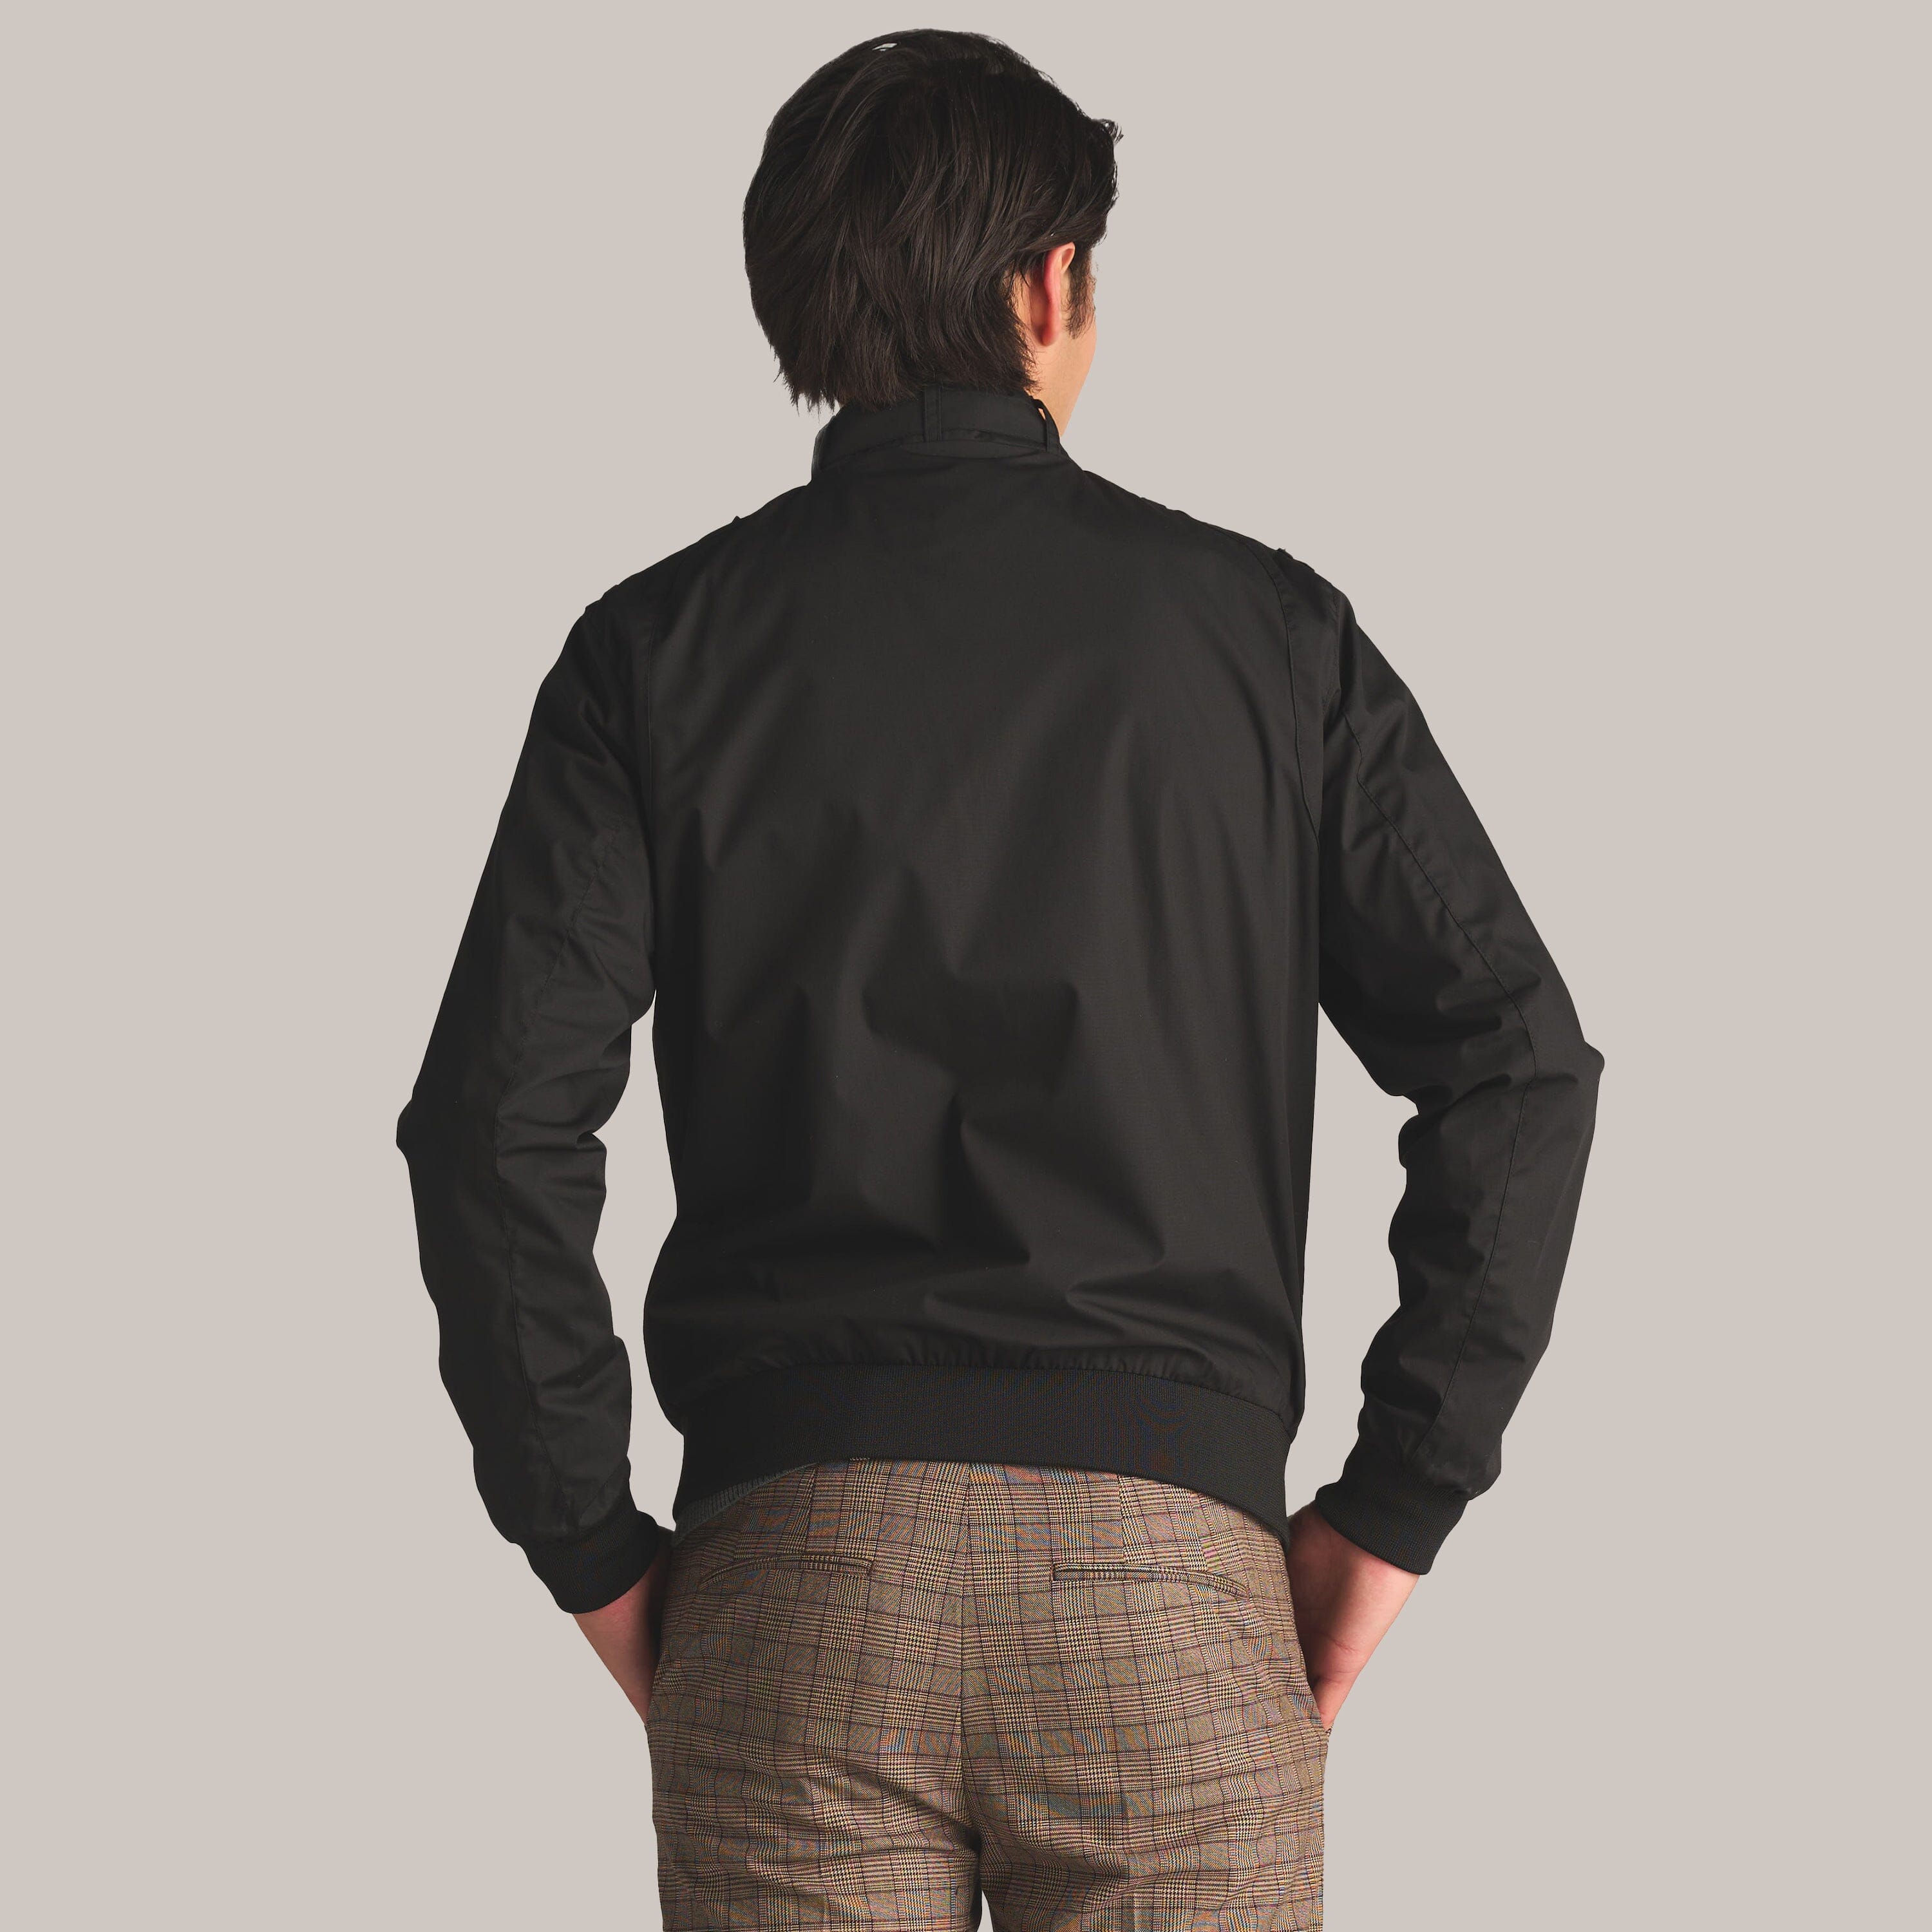 Men's Big & Tall Classic Iconic Racer Jacket (Slim Fit) Unisex Members Only 